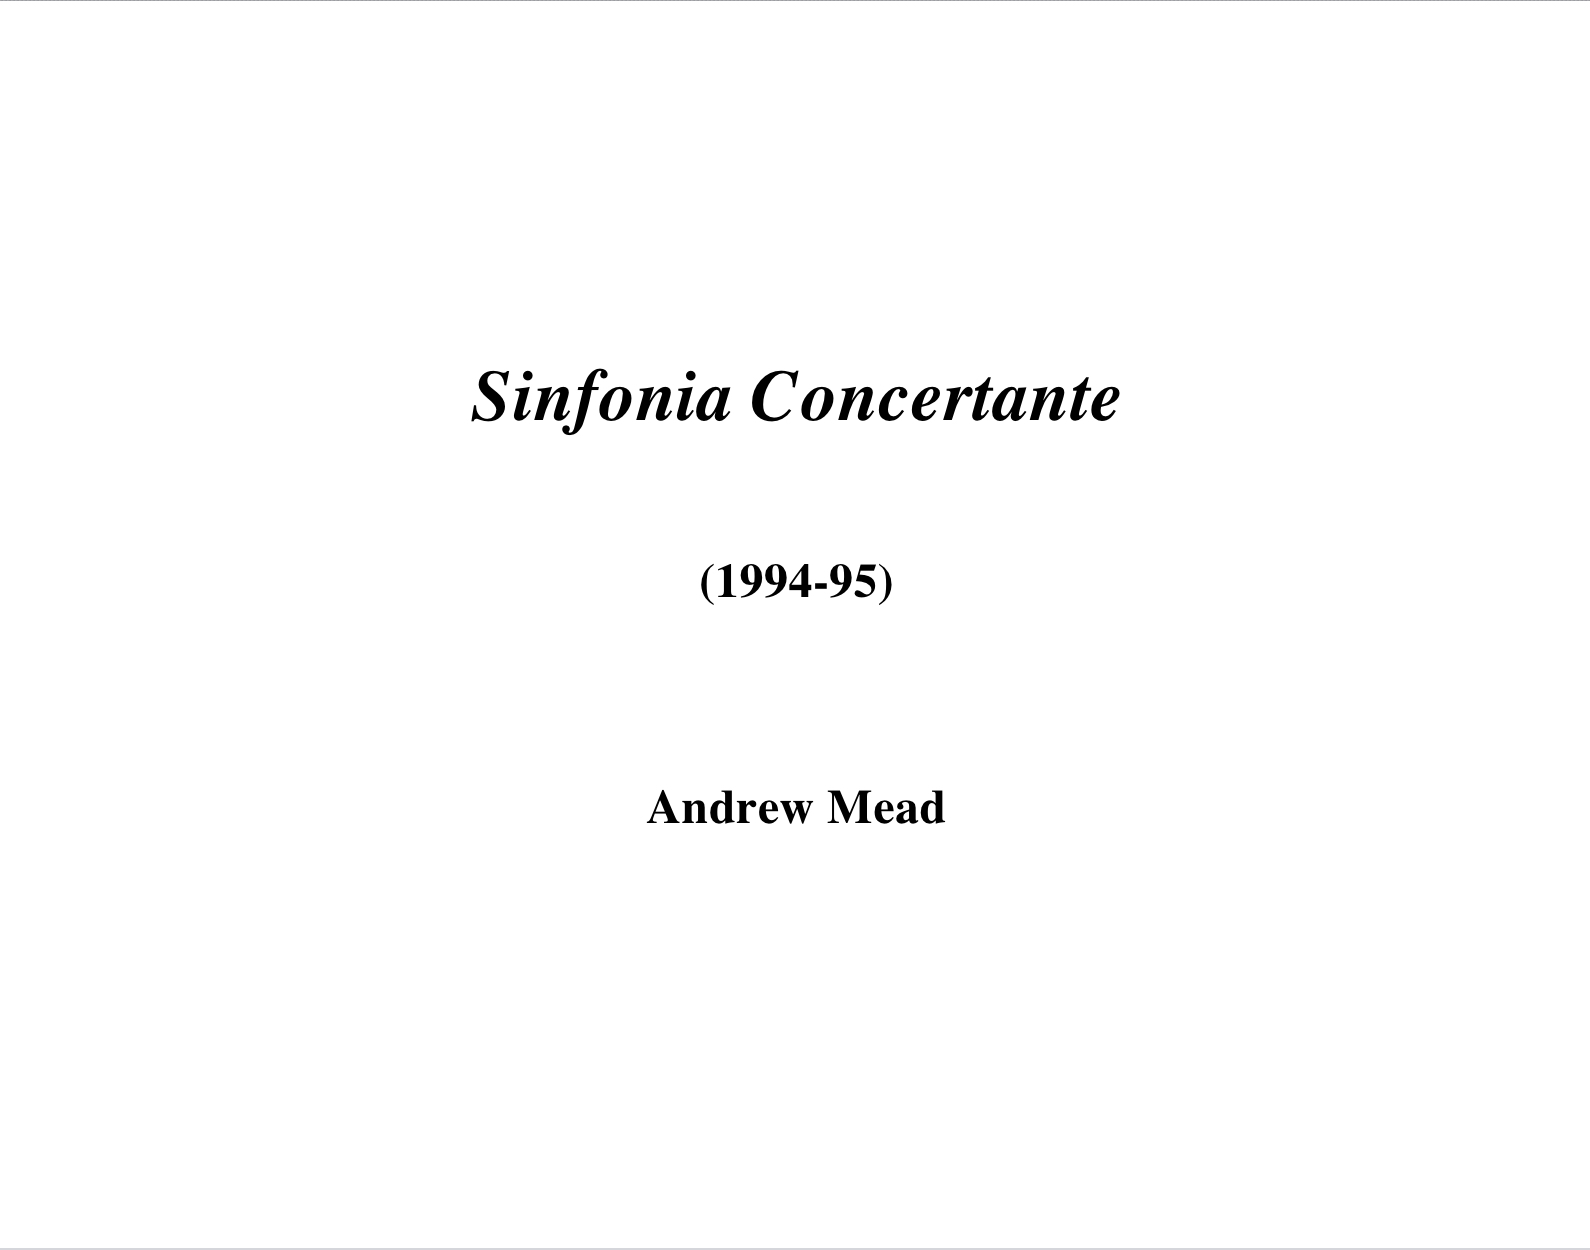 Sinfonia Concertante by Andrew Mead